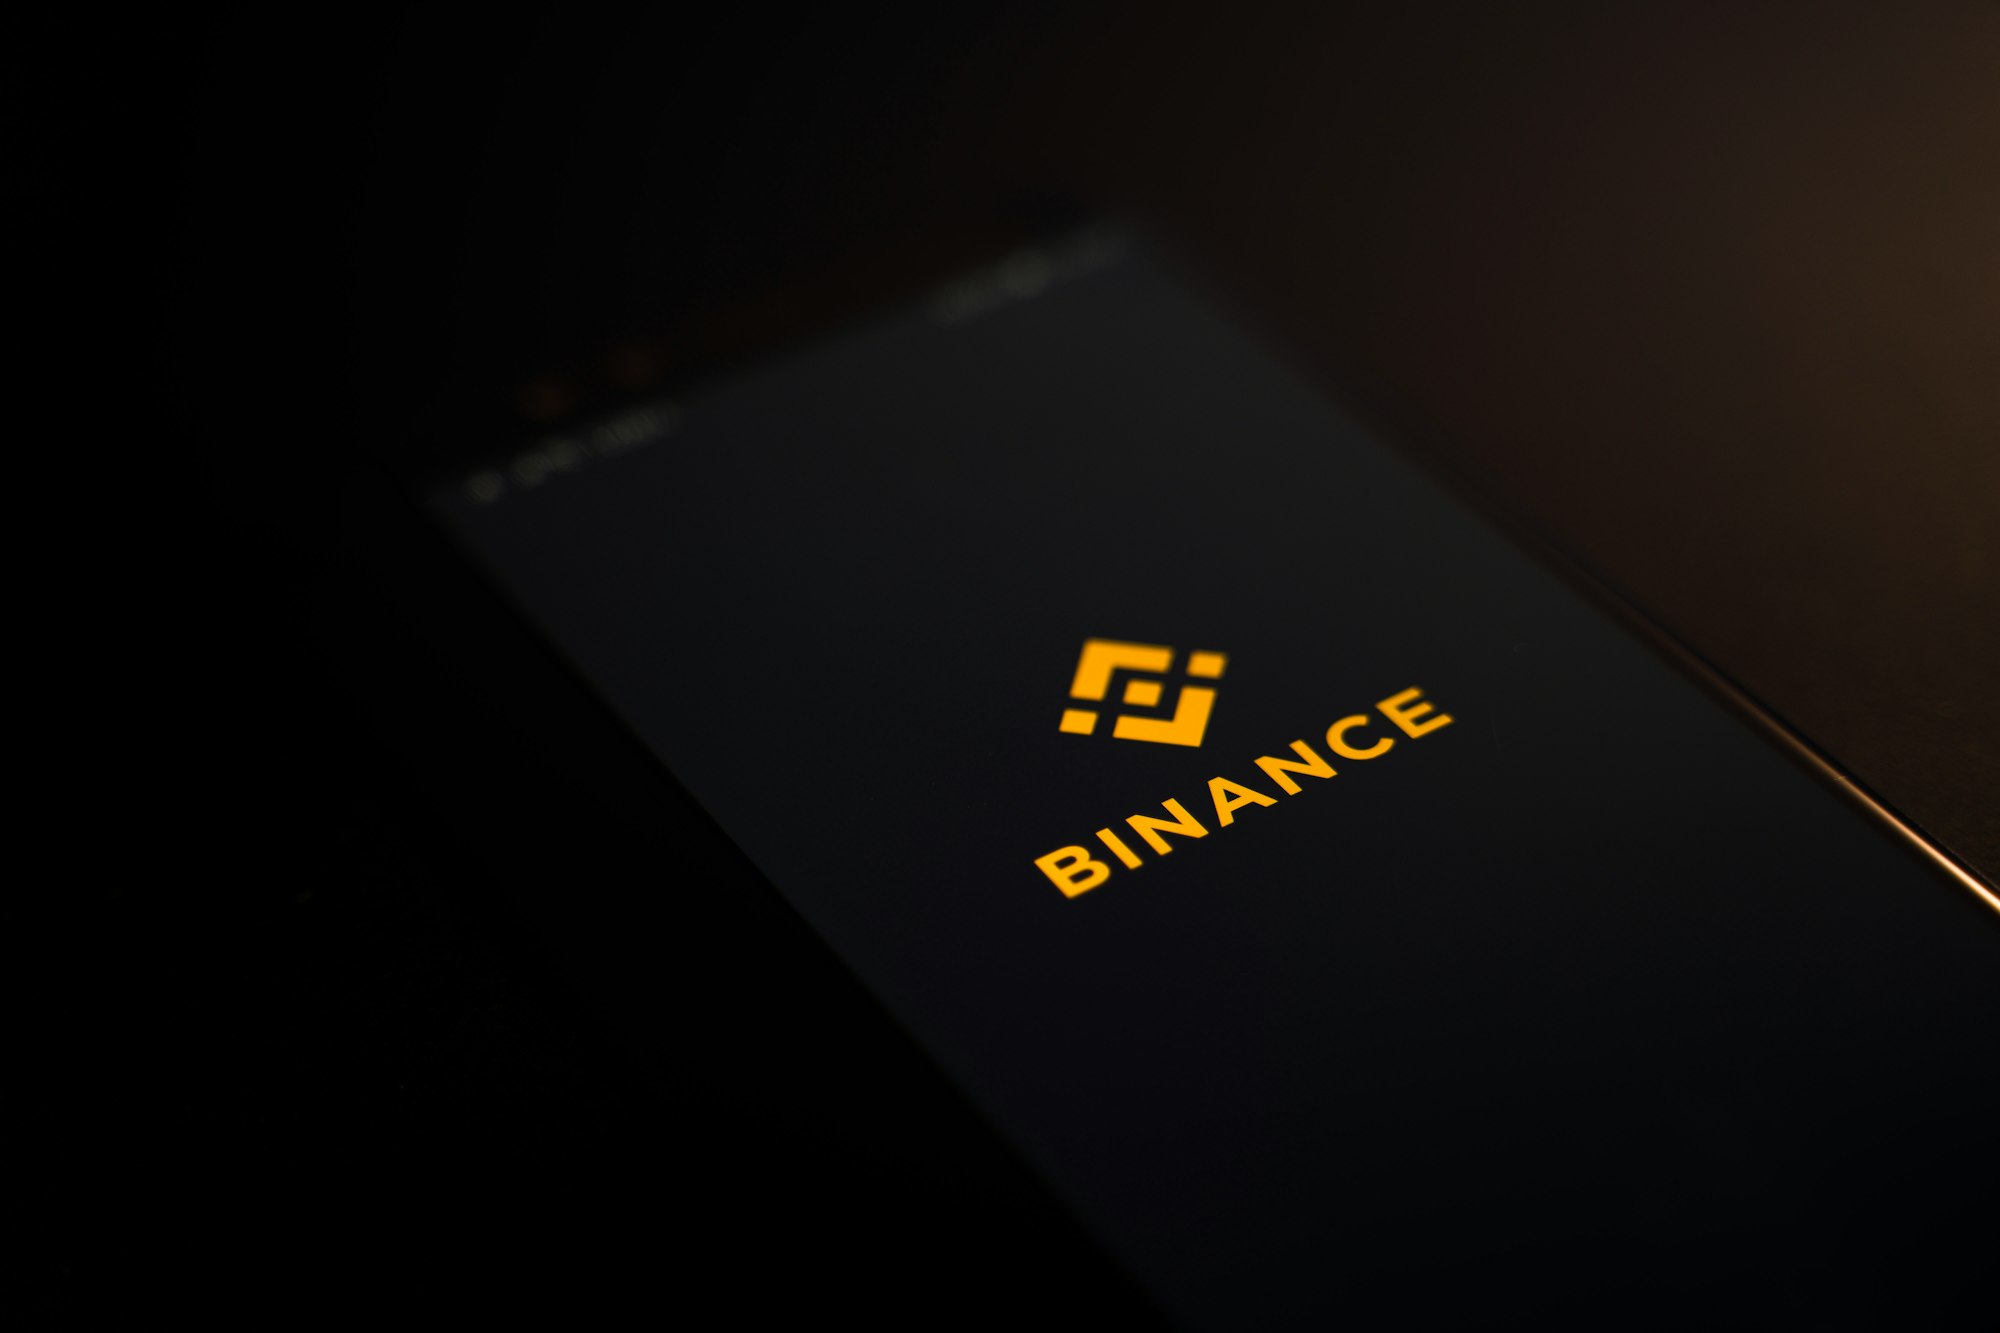 Binance Continues to Face a Barrage of Regulatory Setbacks Globally